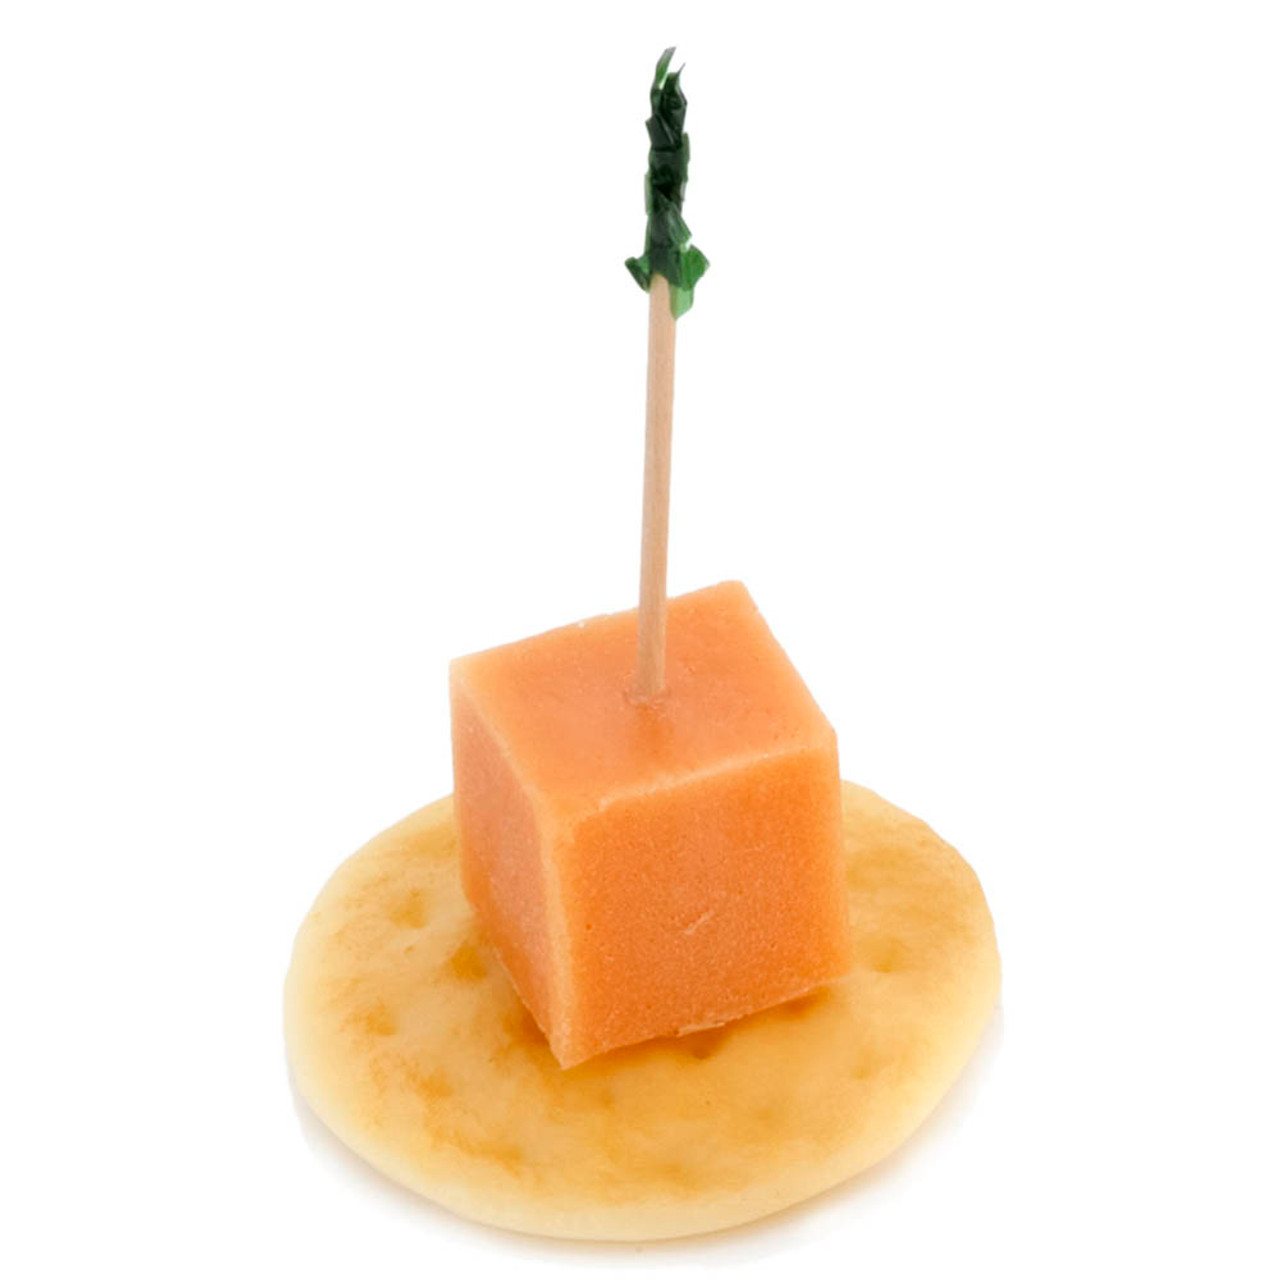 Fake Cheddar Cheese Cube on Cracker